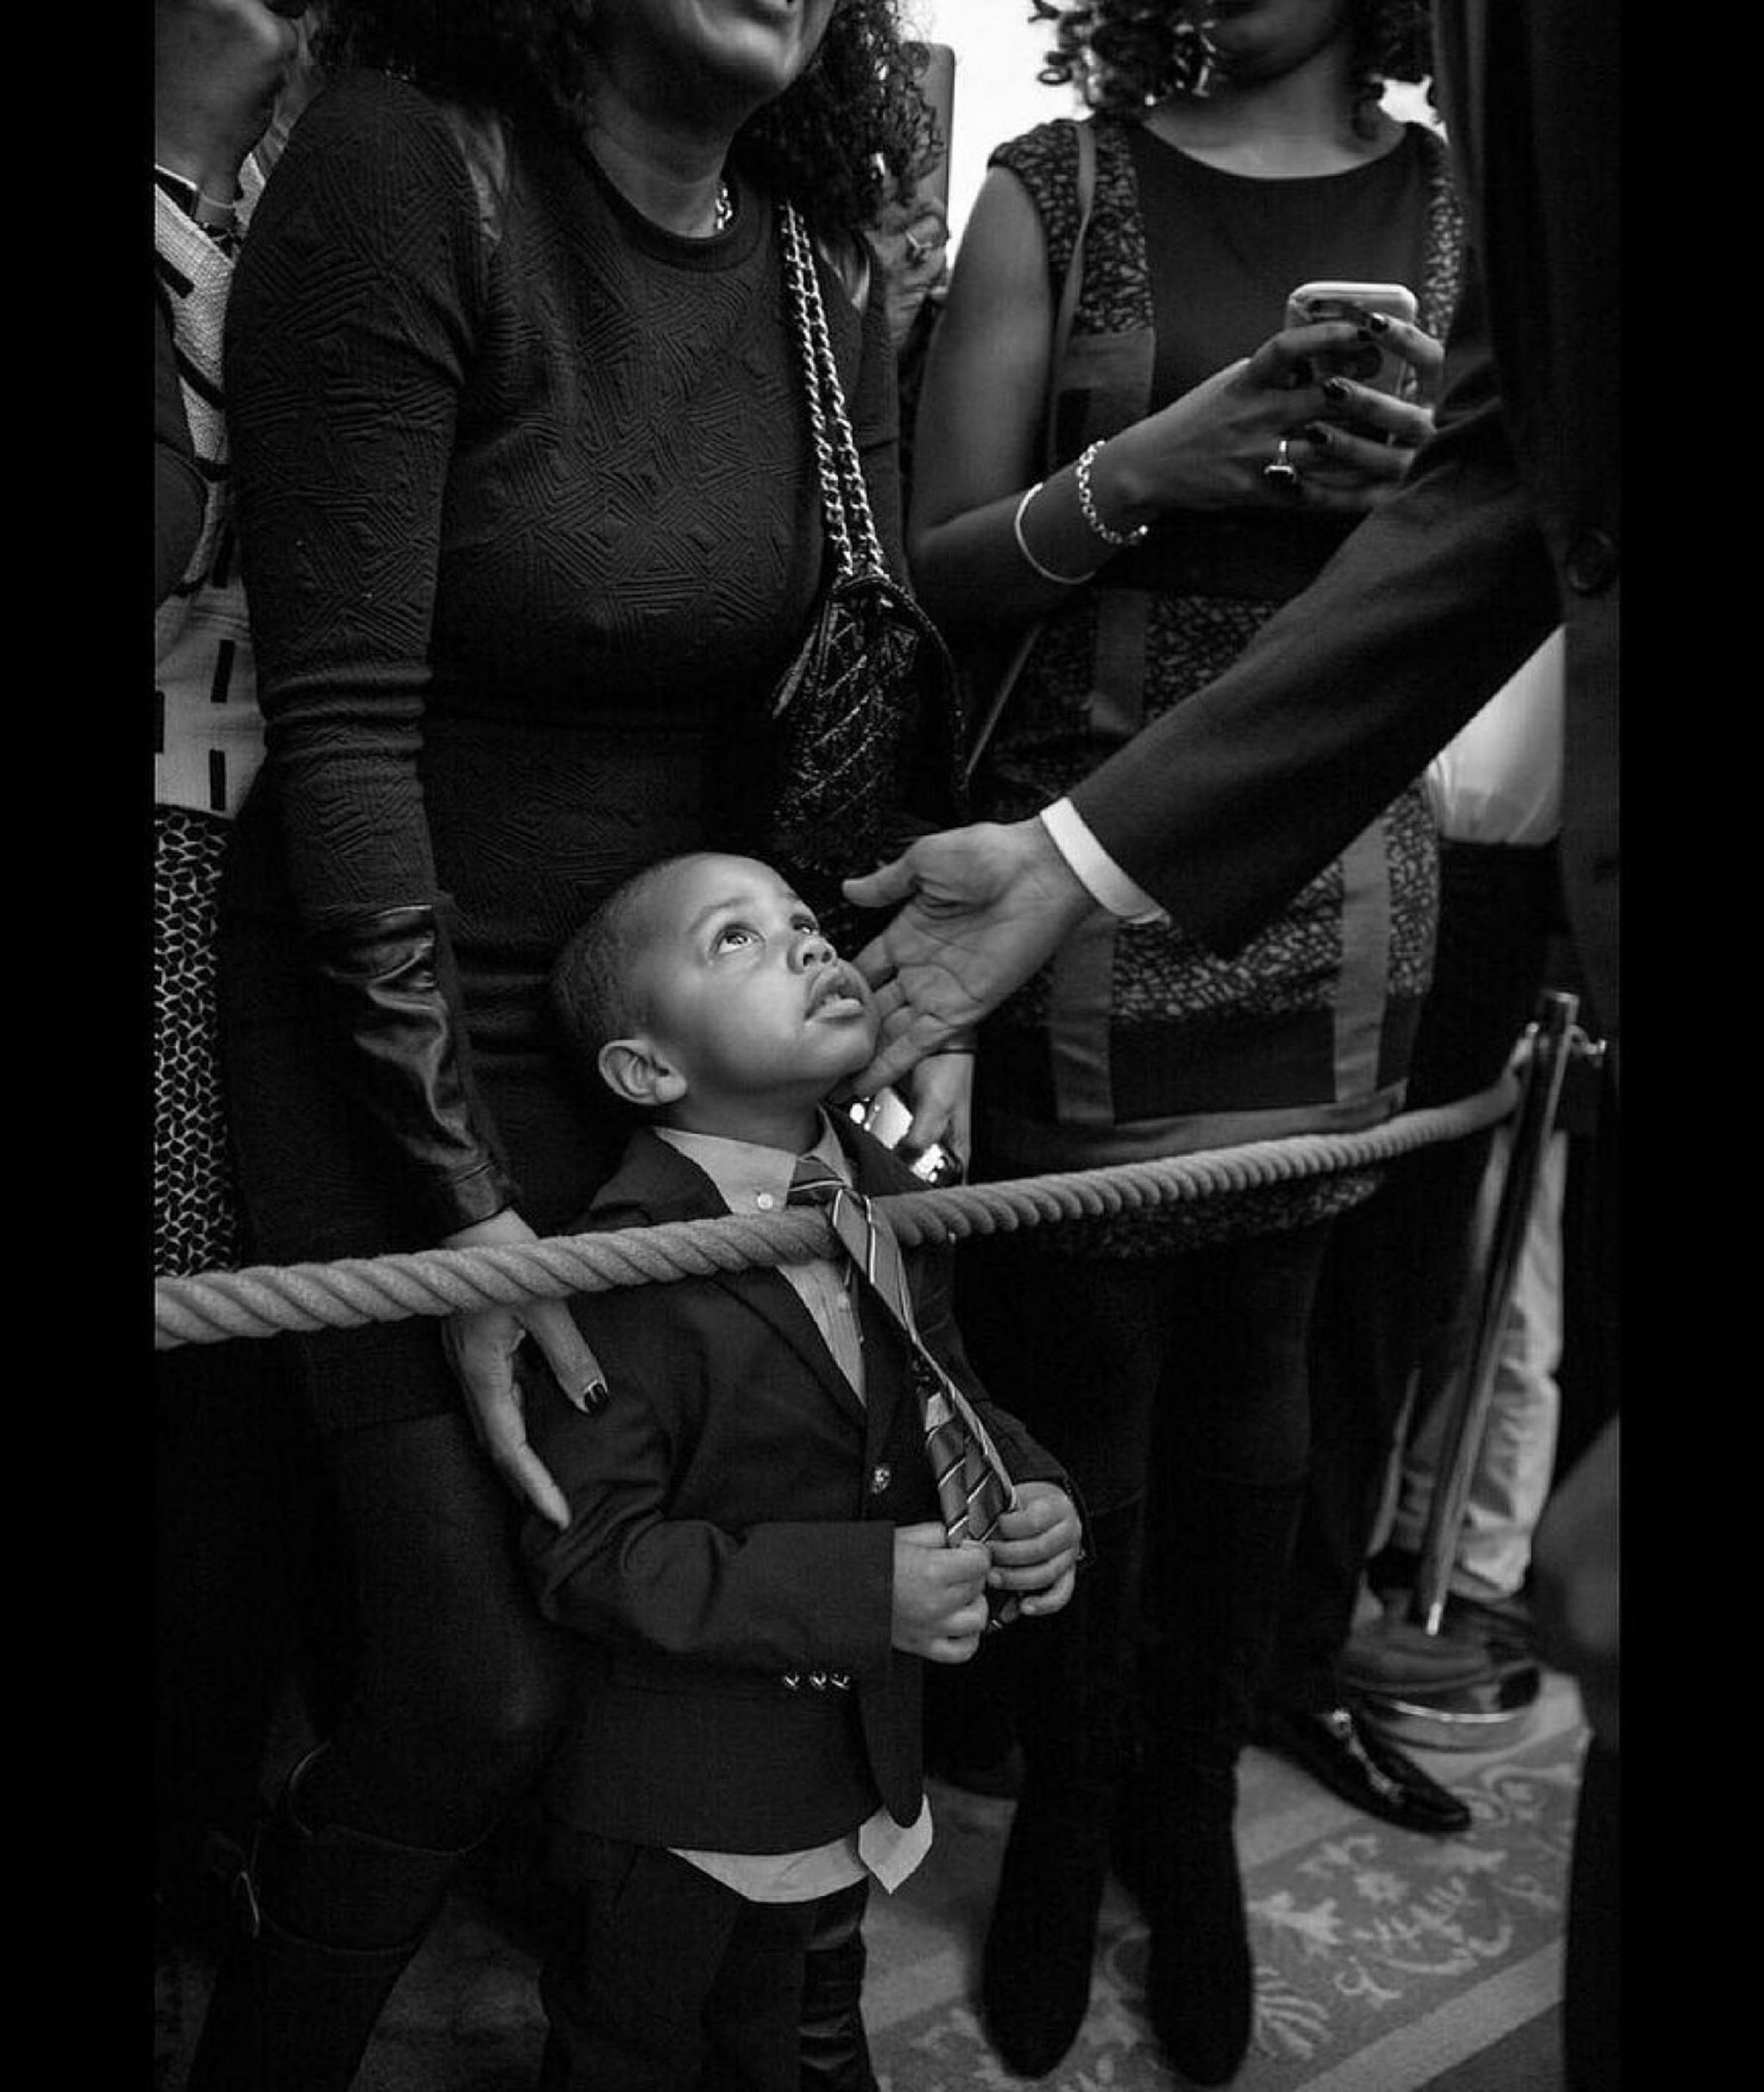 In this official White House photograph, President Barack Obama greets a young guest during a reception celebrating african american history month in the east room of the white house, on Feb. 18, 2016.